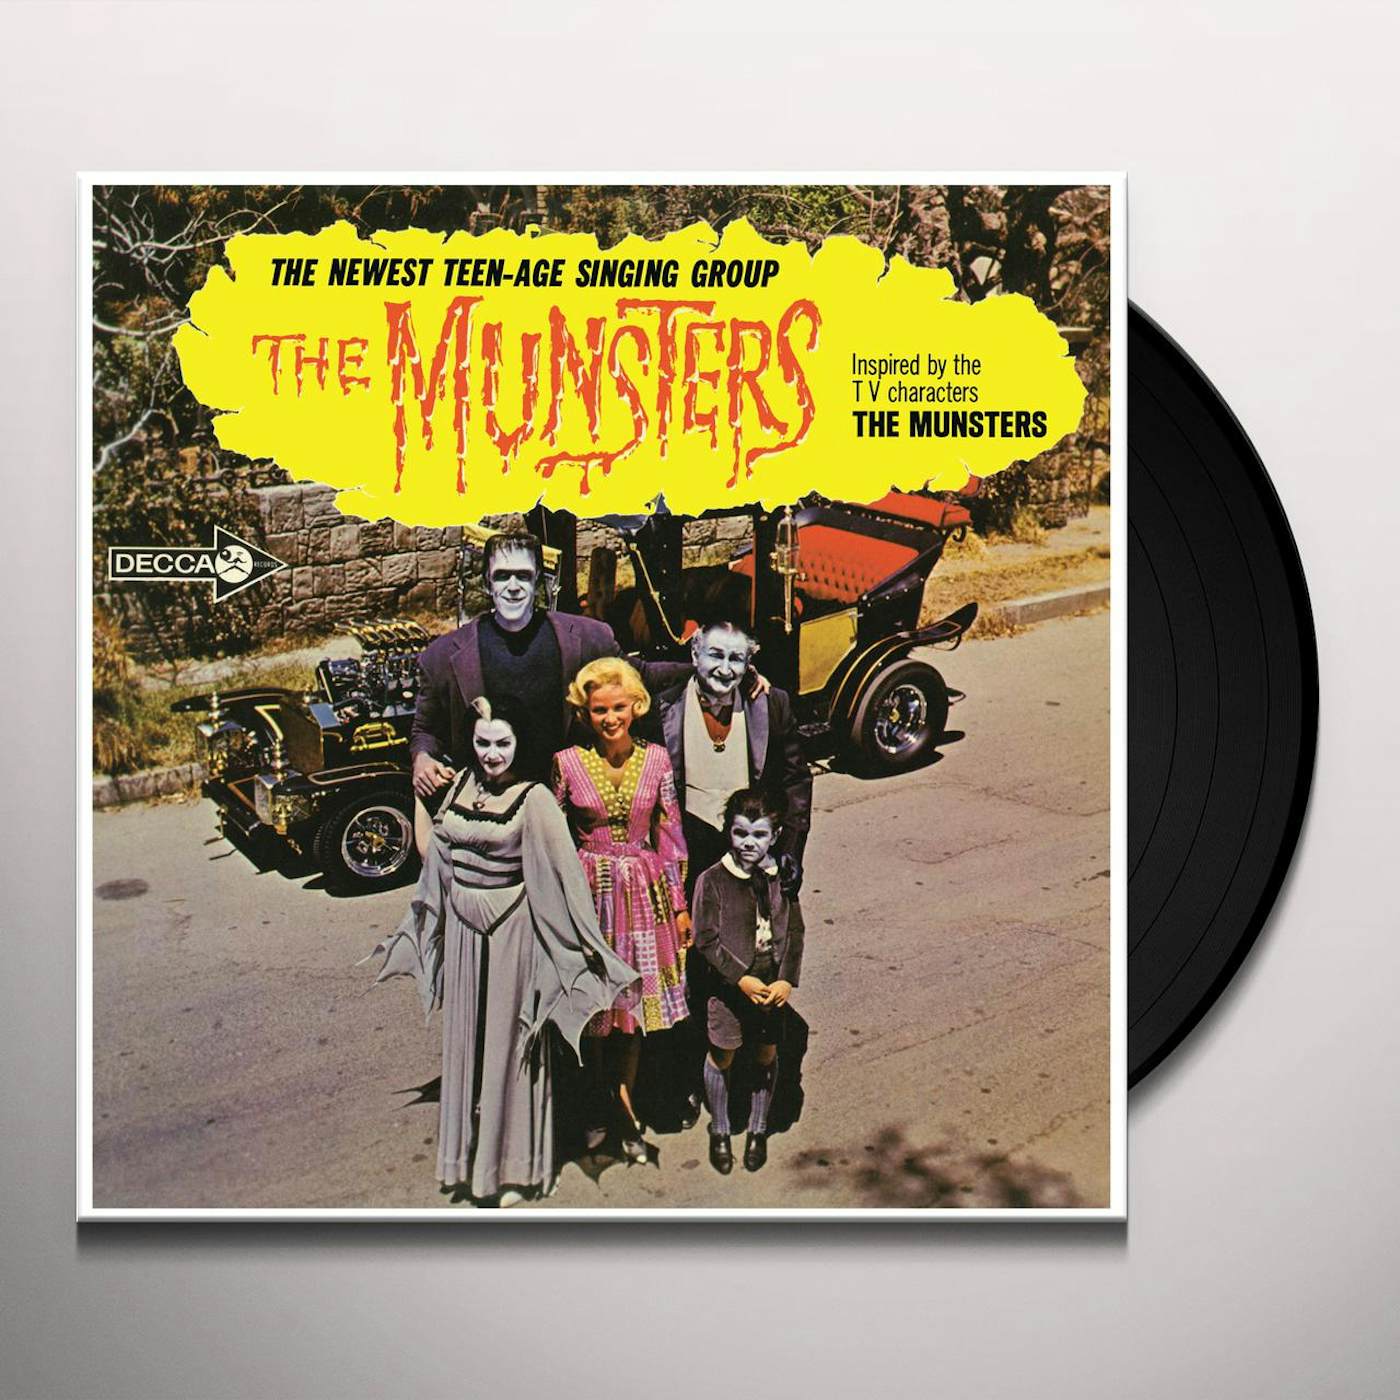 The Munsters Vinyl Record